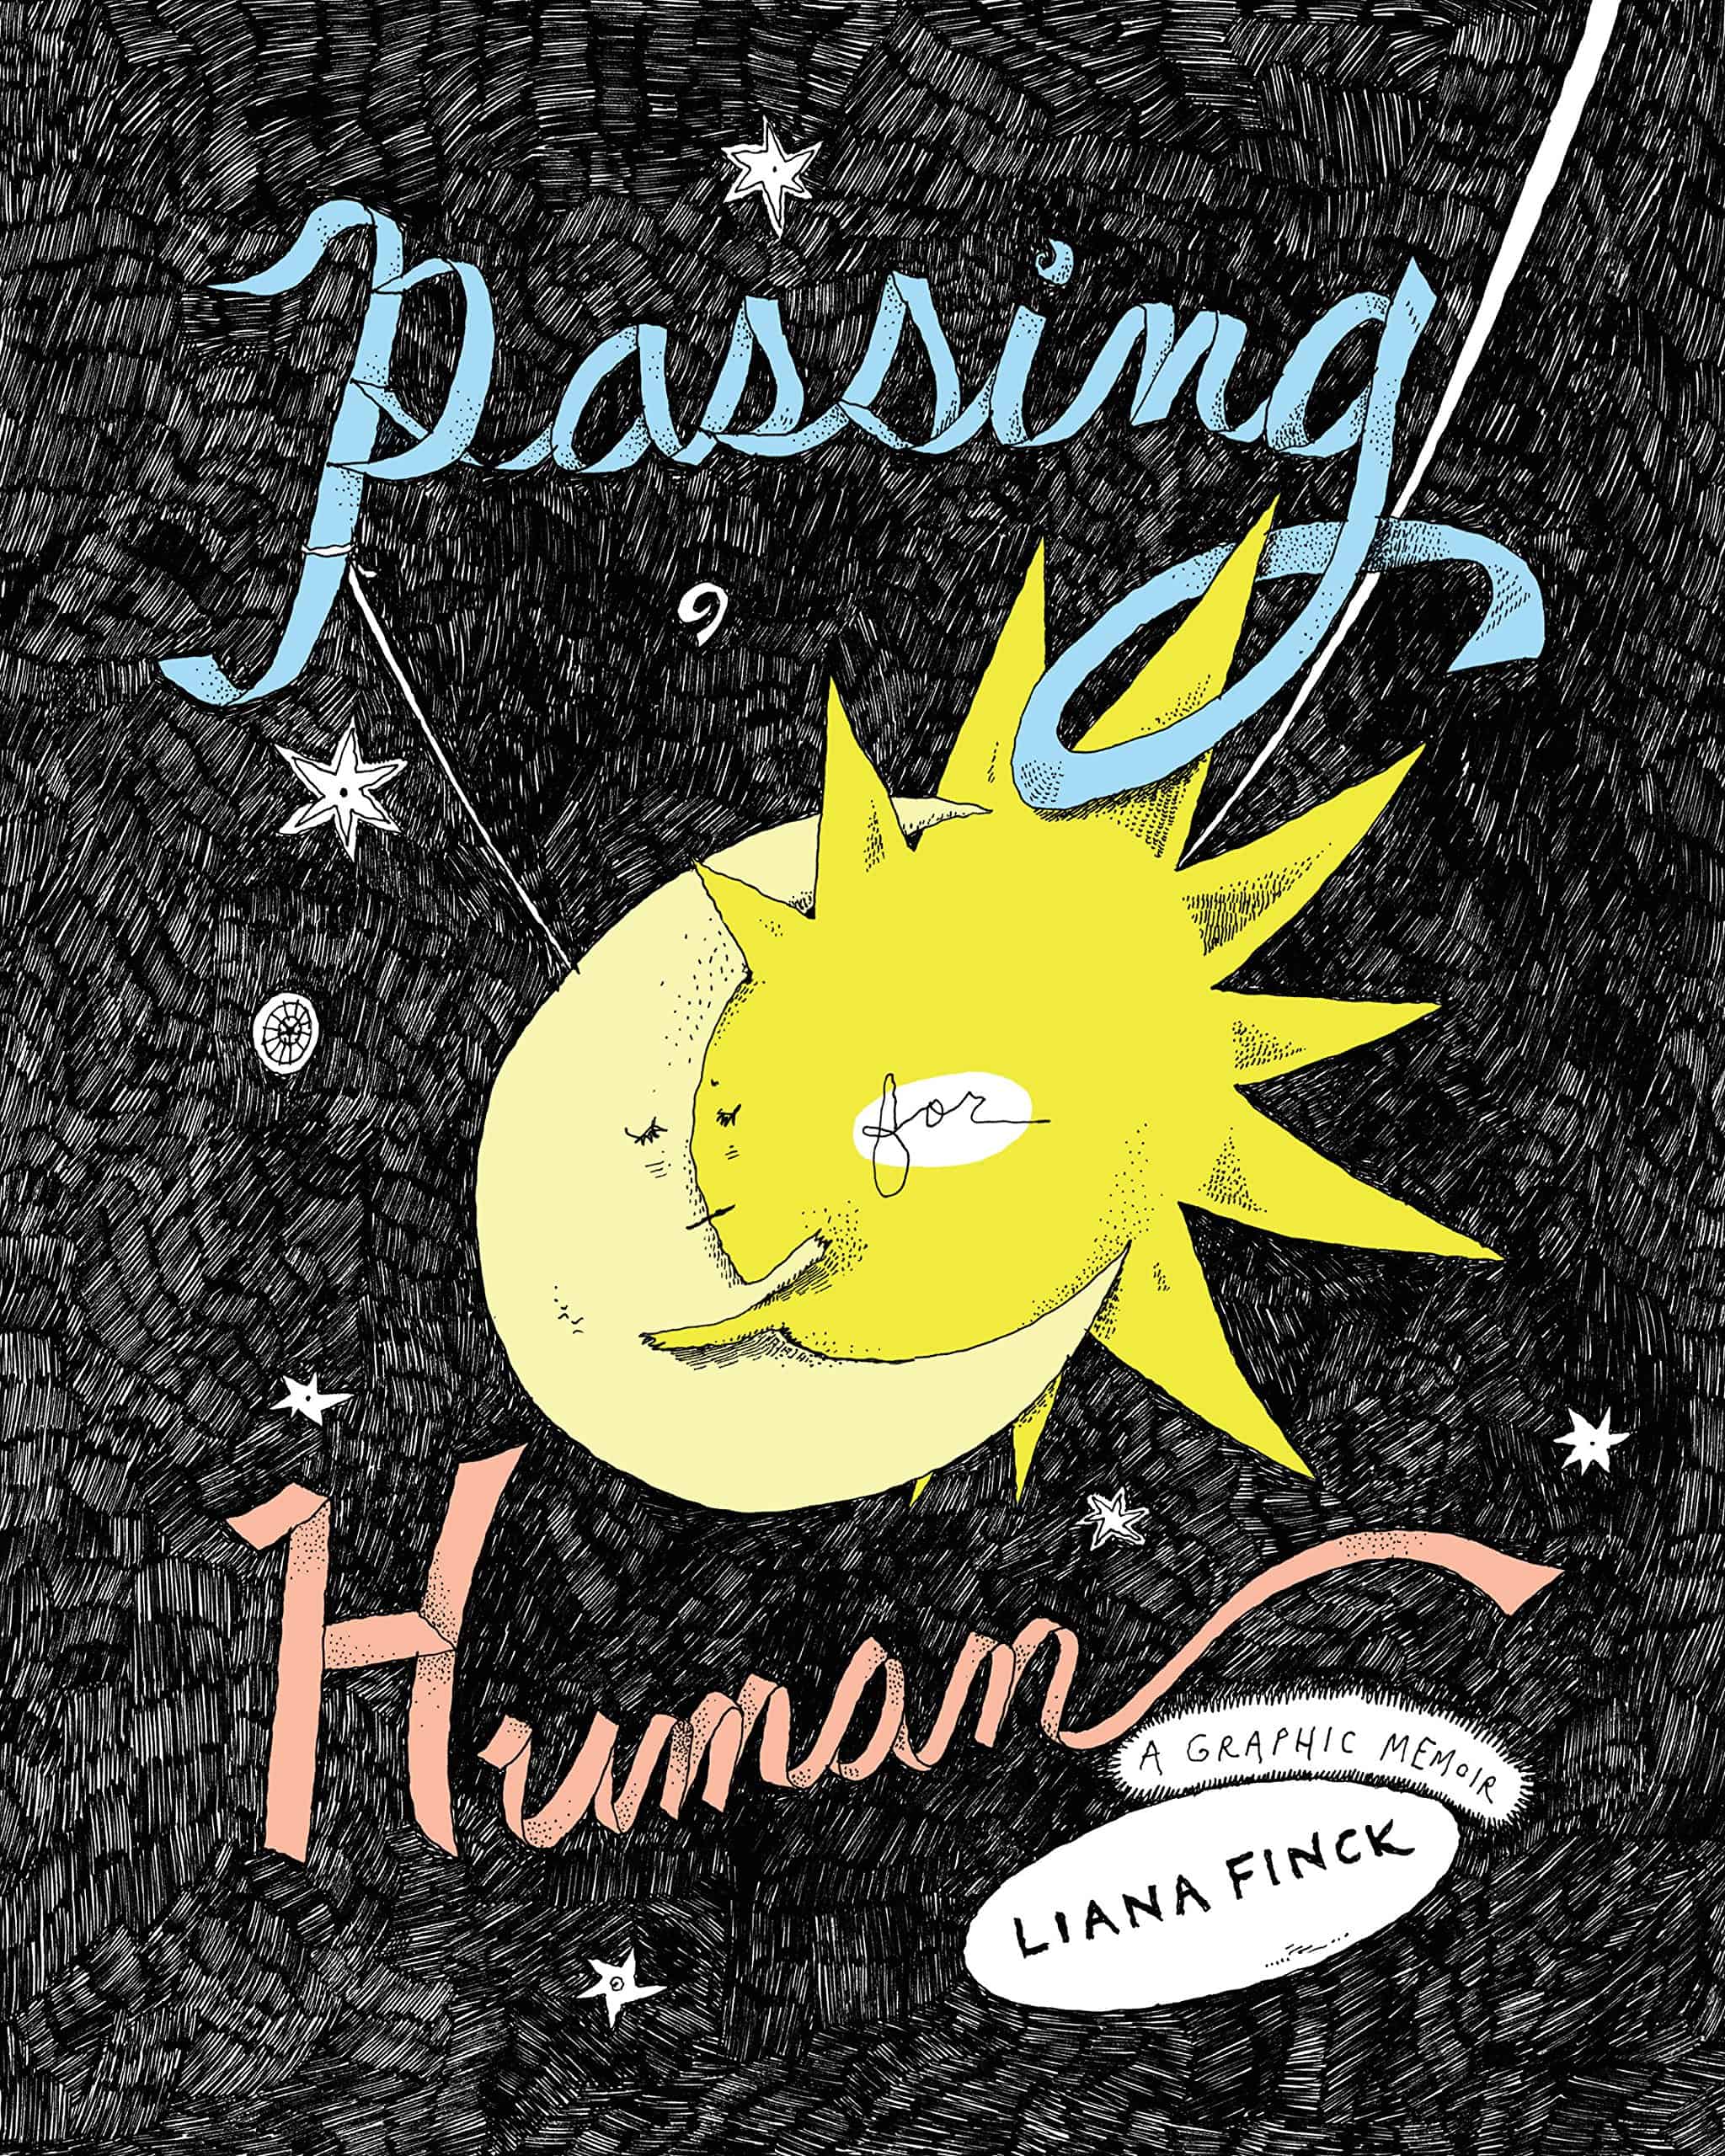 Passing For Human by Liana Finck